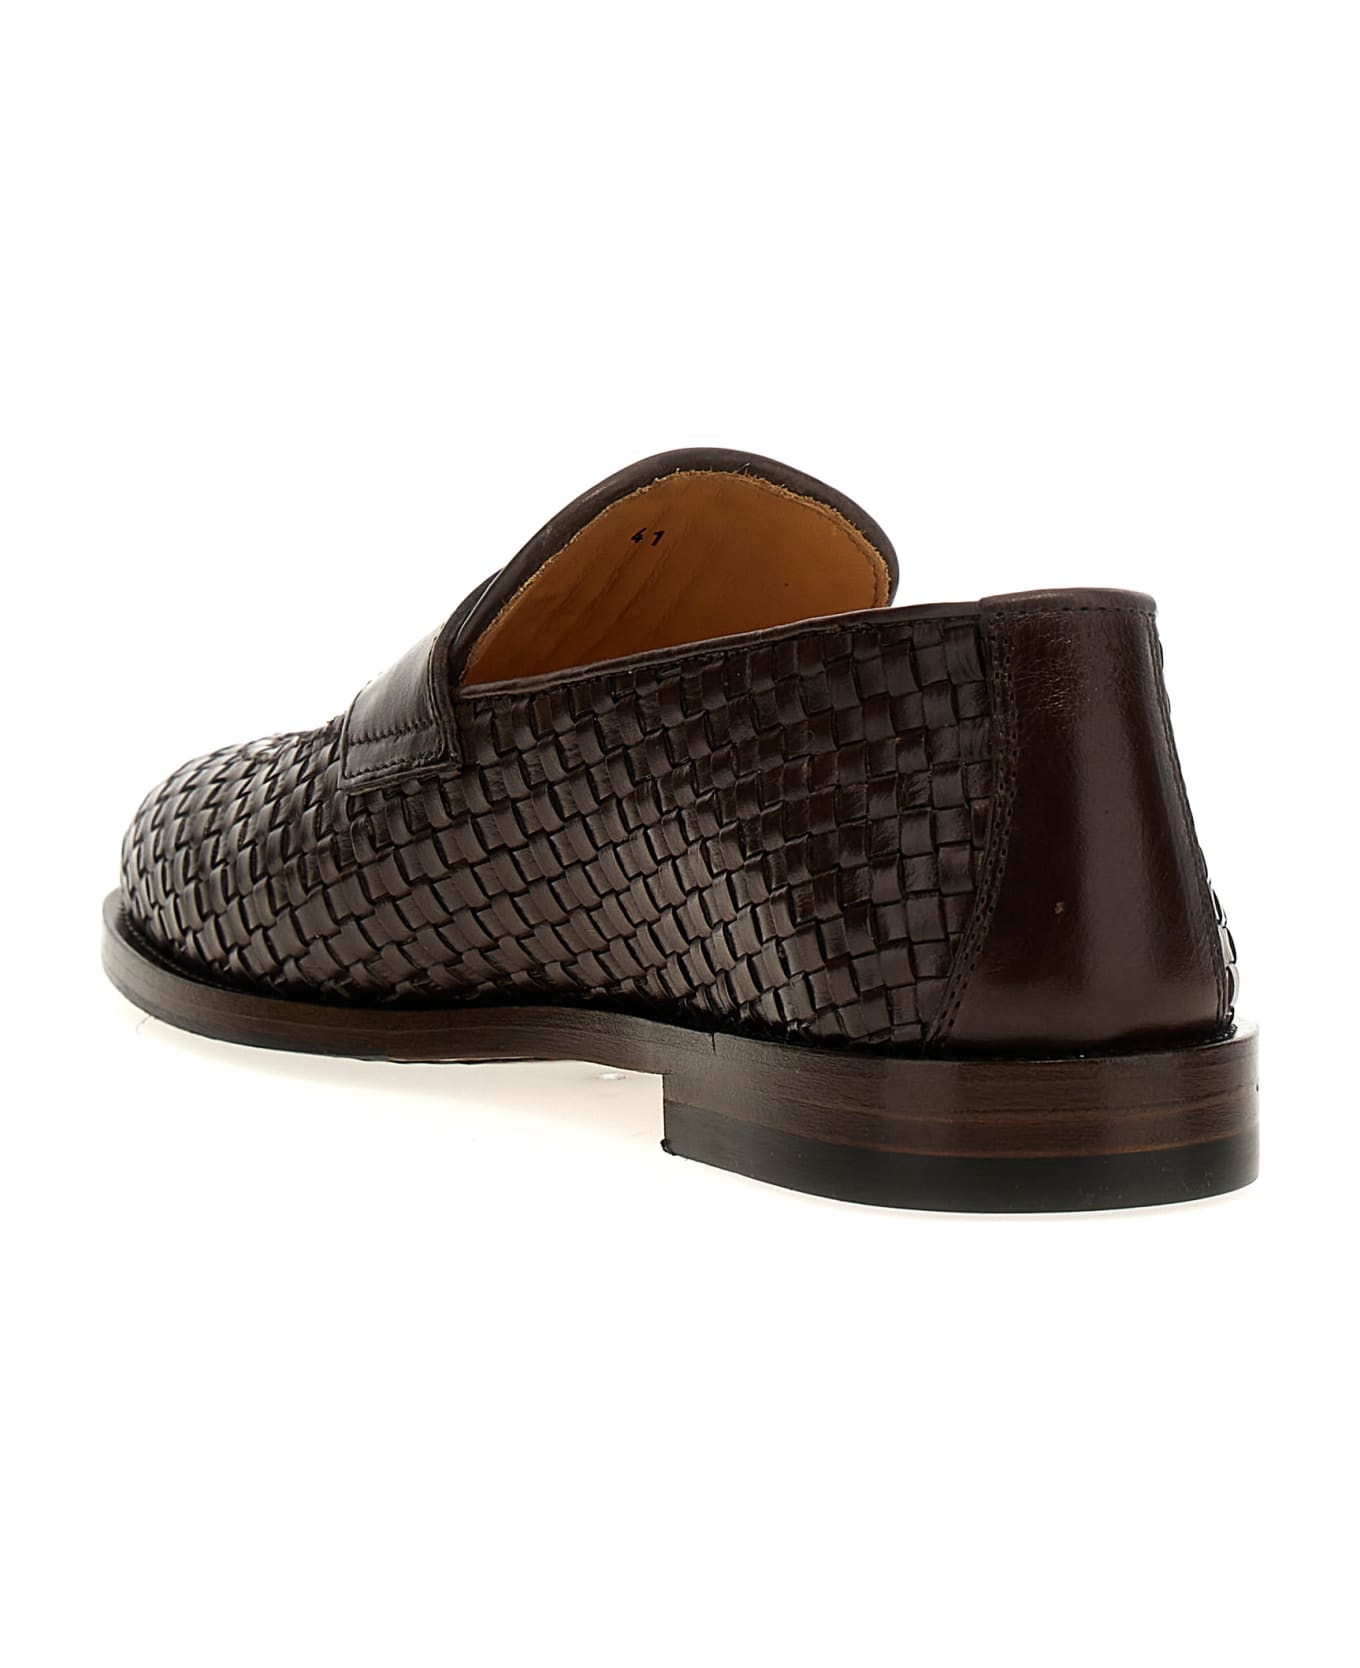 Brunello Cucinelli Braided Leather Loafers - Brown